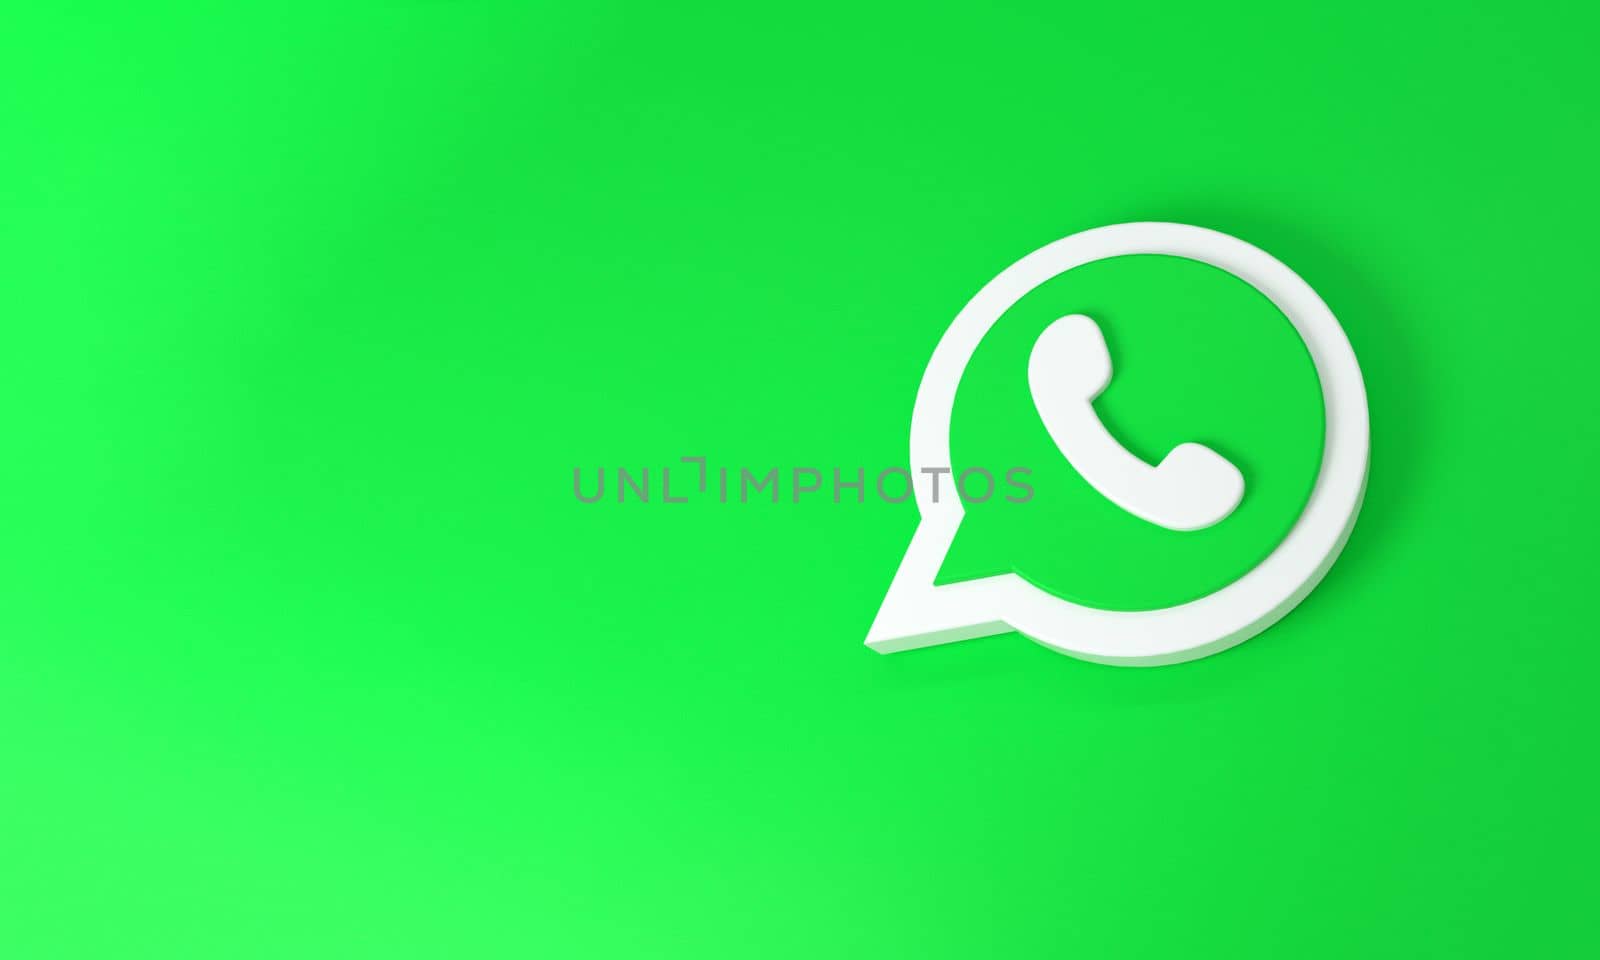 Whatsapp logo with space for text and graphics on green background. by ImagesRouges